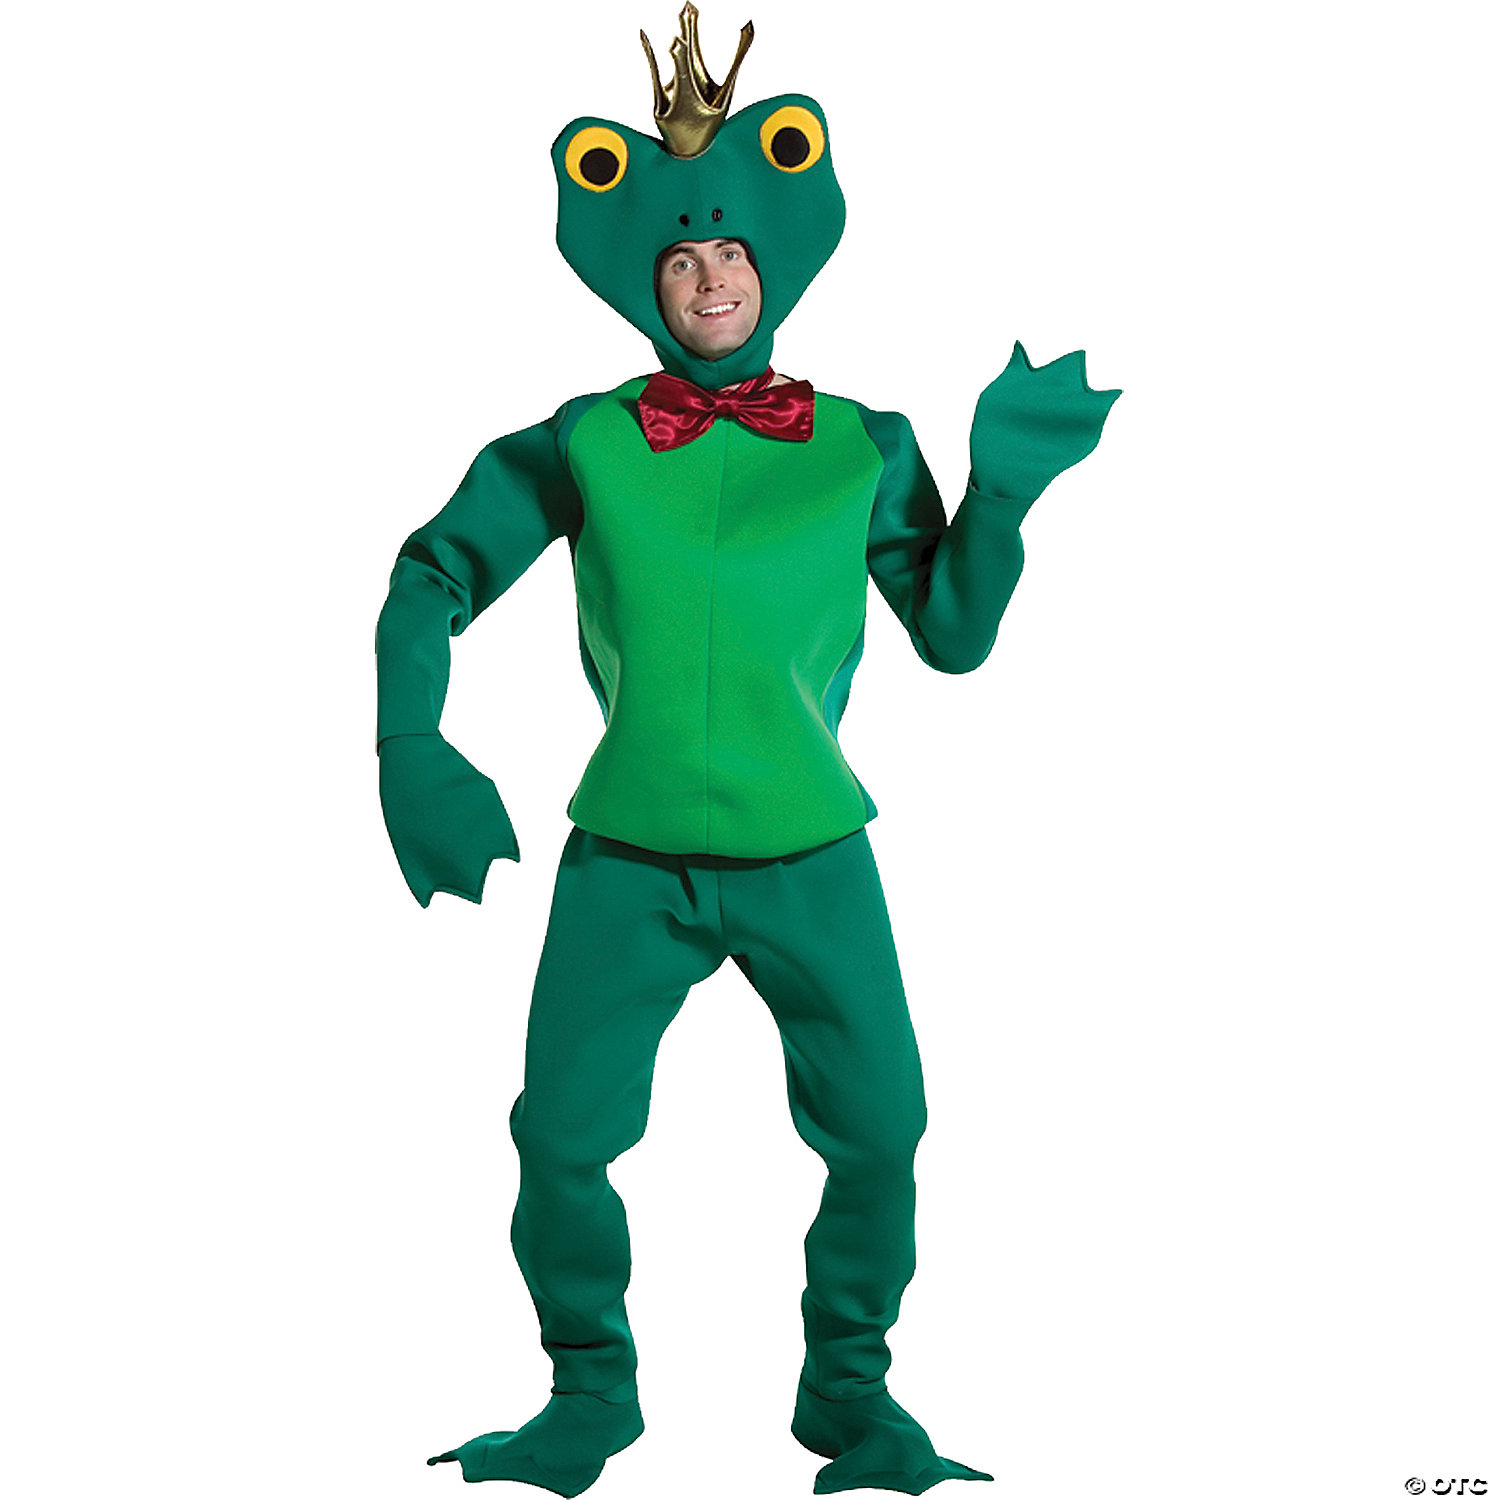 Cute Frog Prince Mascot Costume Halloween Party Fancy Dress Adult Cosplay Outfit